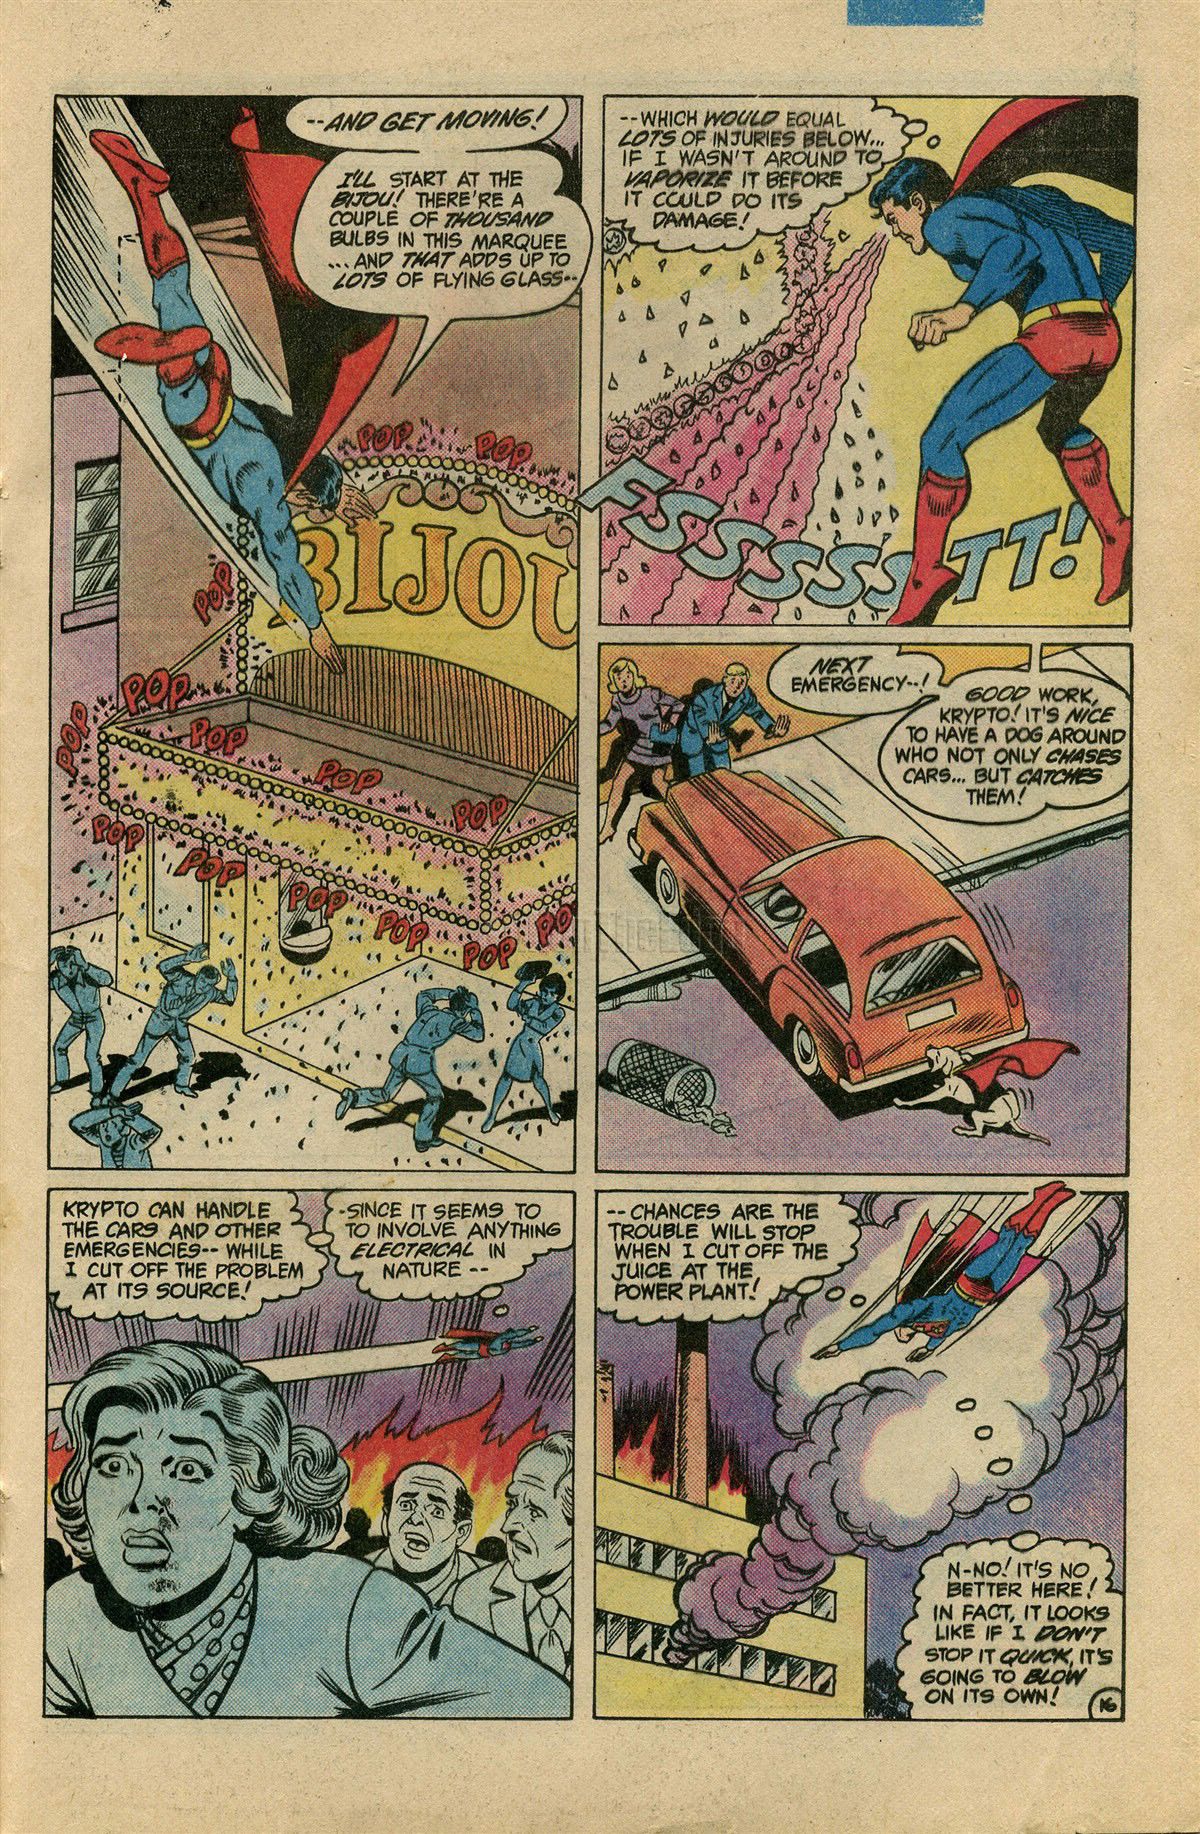 The New Adventures of Superboy 52 Page 19